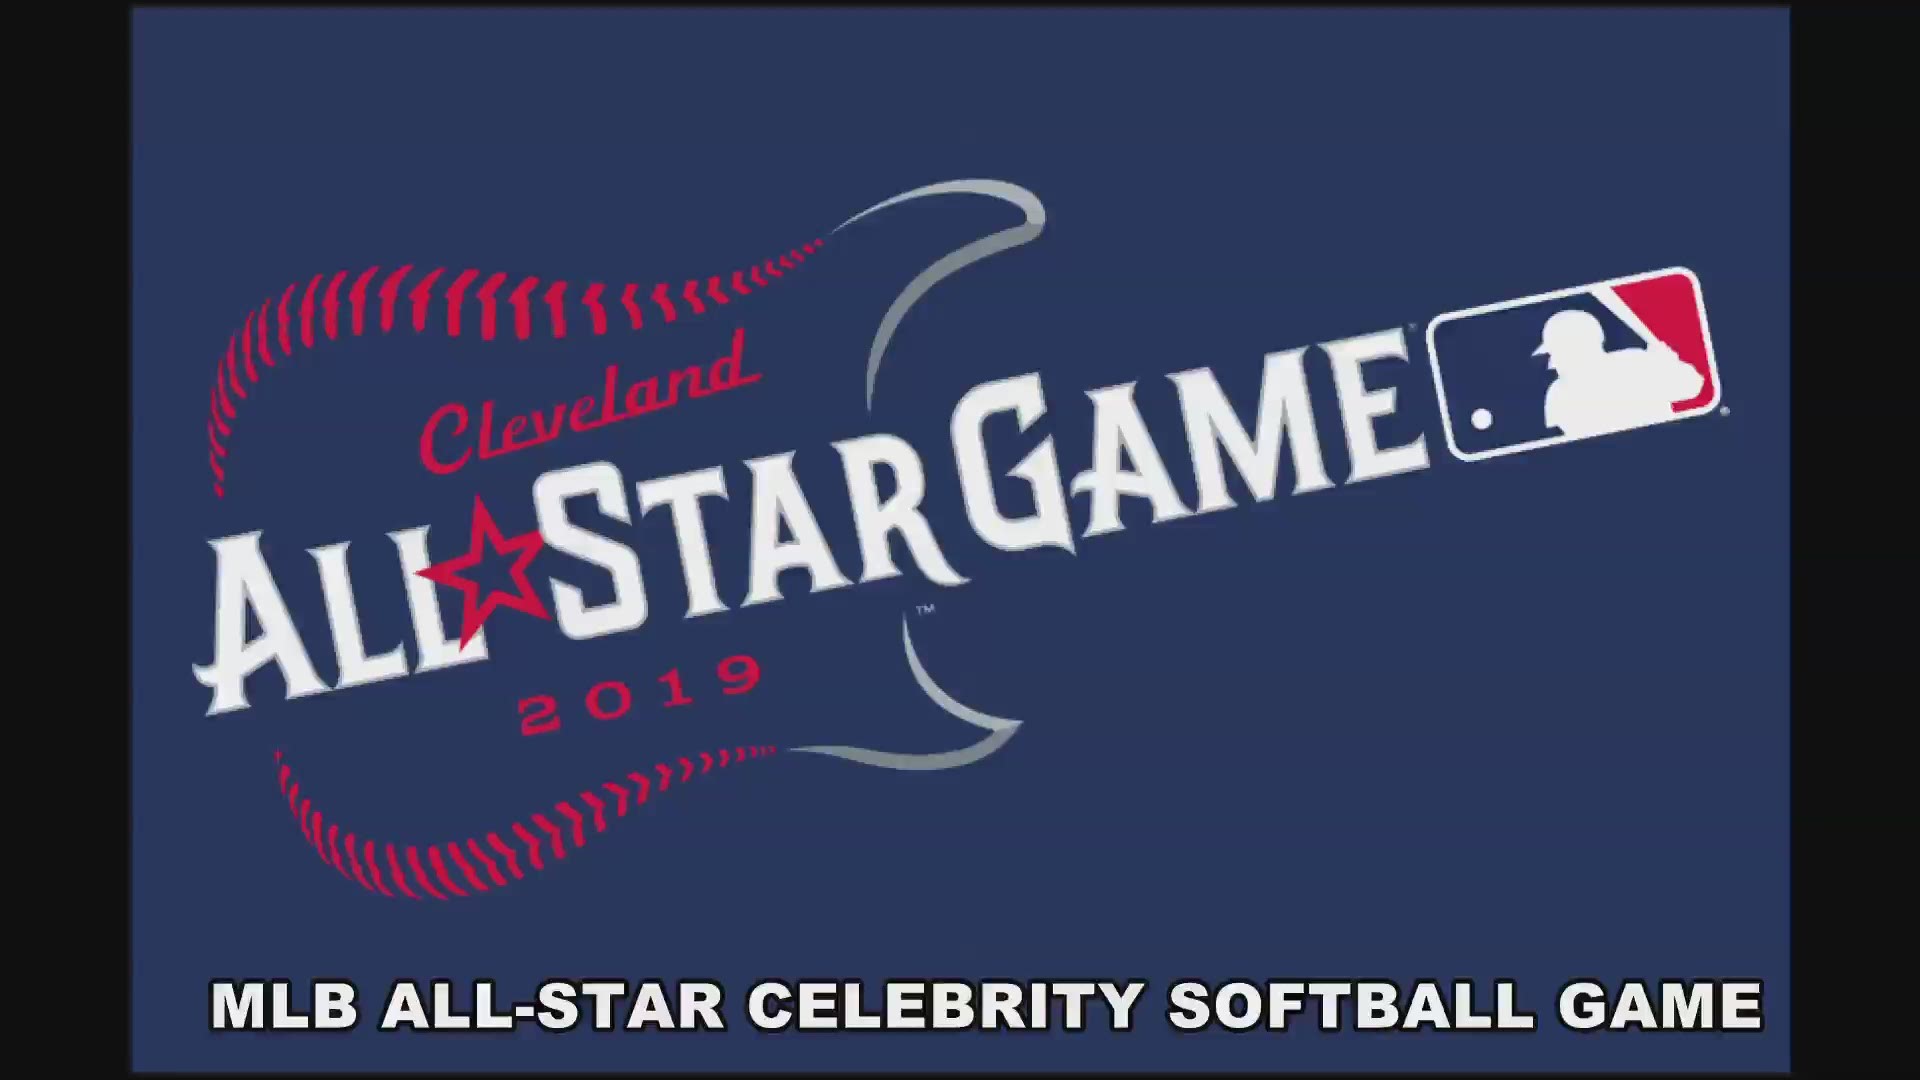 On Tuesday, Major League Baseball announced the rosters for its 'Cleveland vs. the World' Celebrity Softball Game.